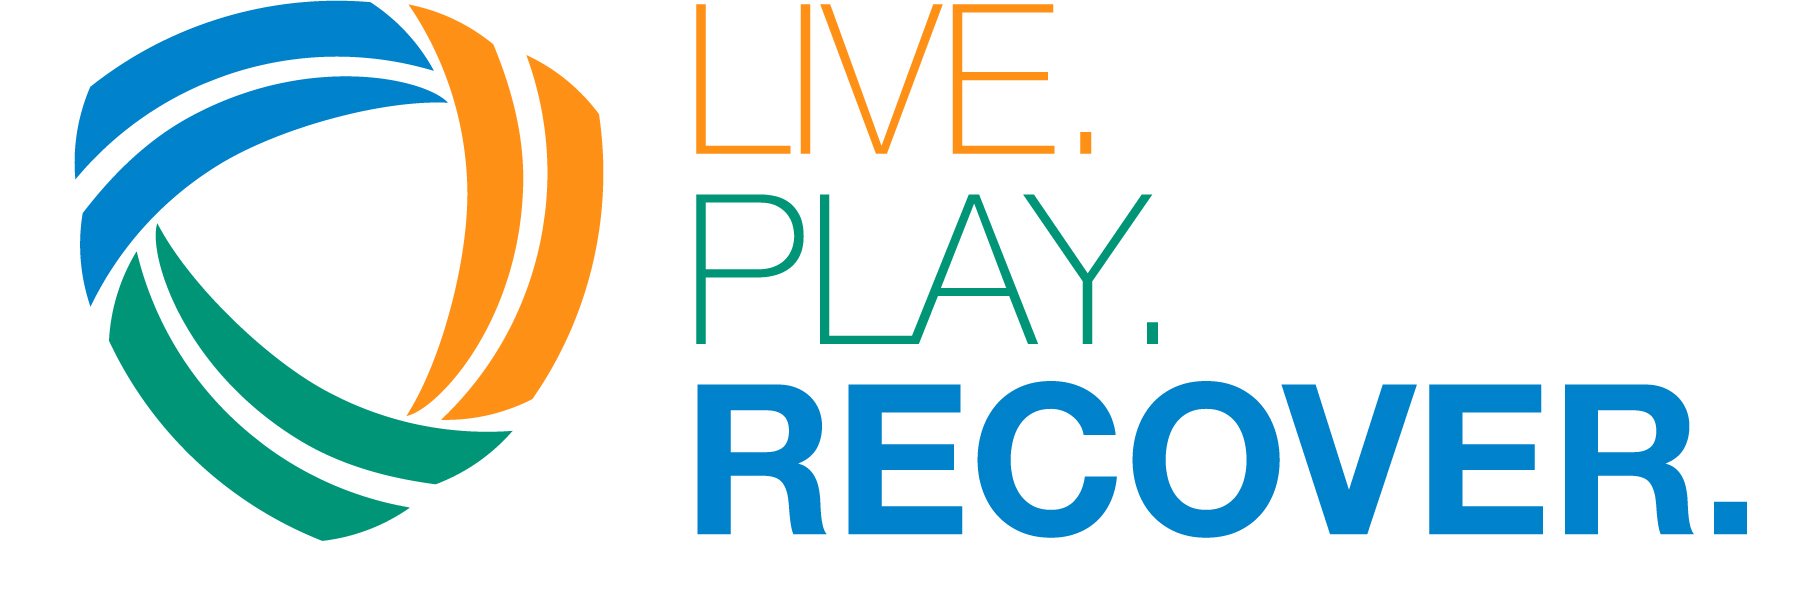  LIVE. PLAY. RECOVER.